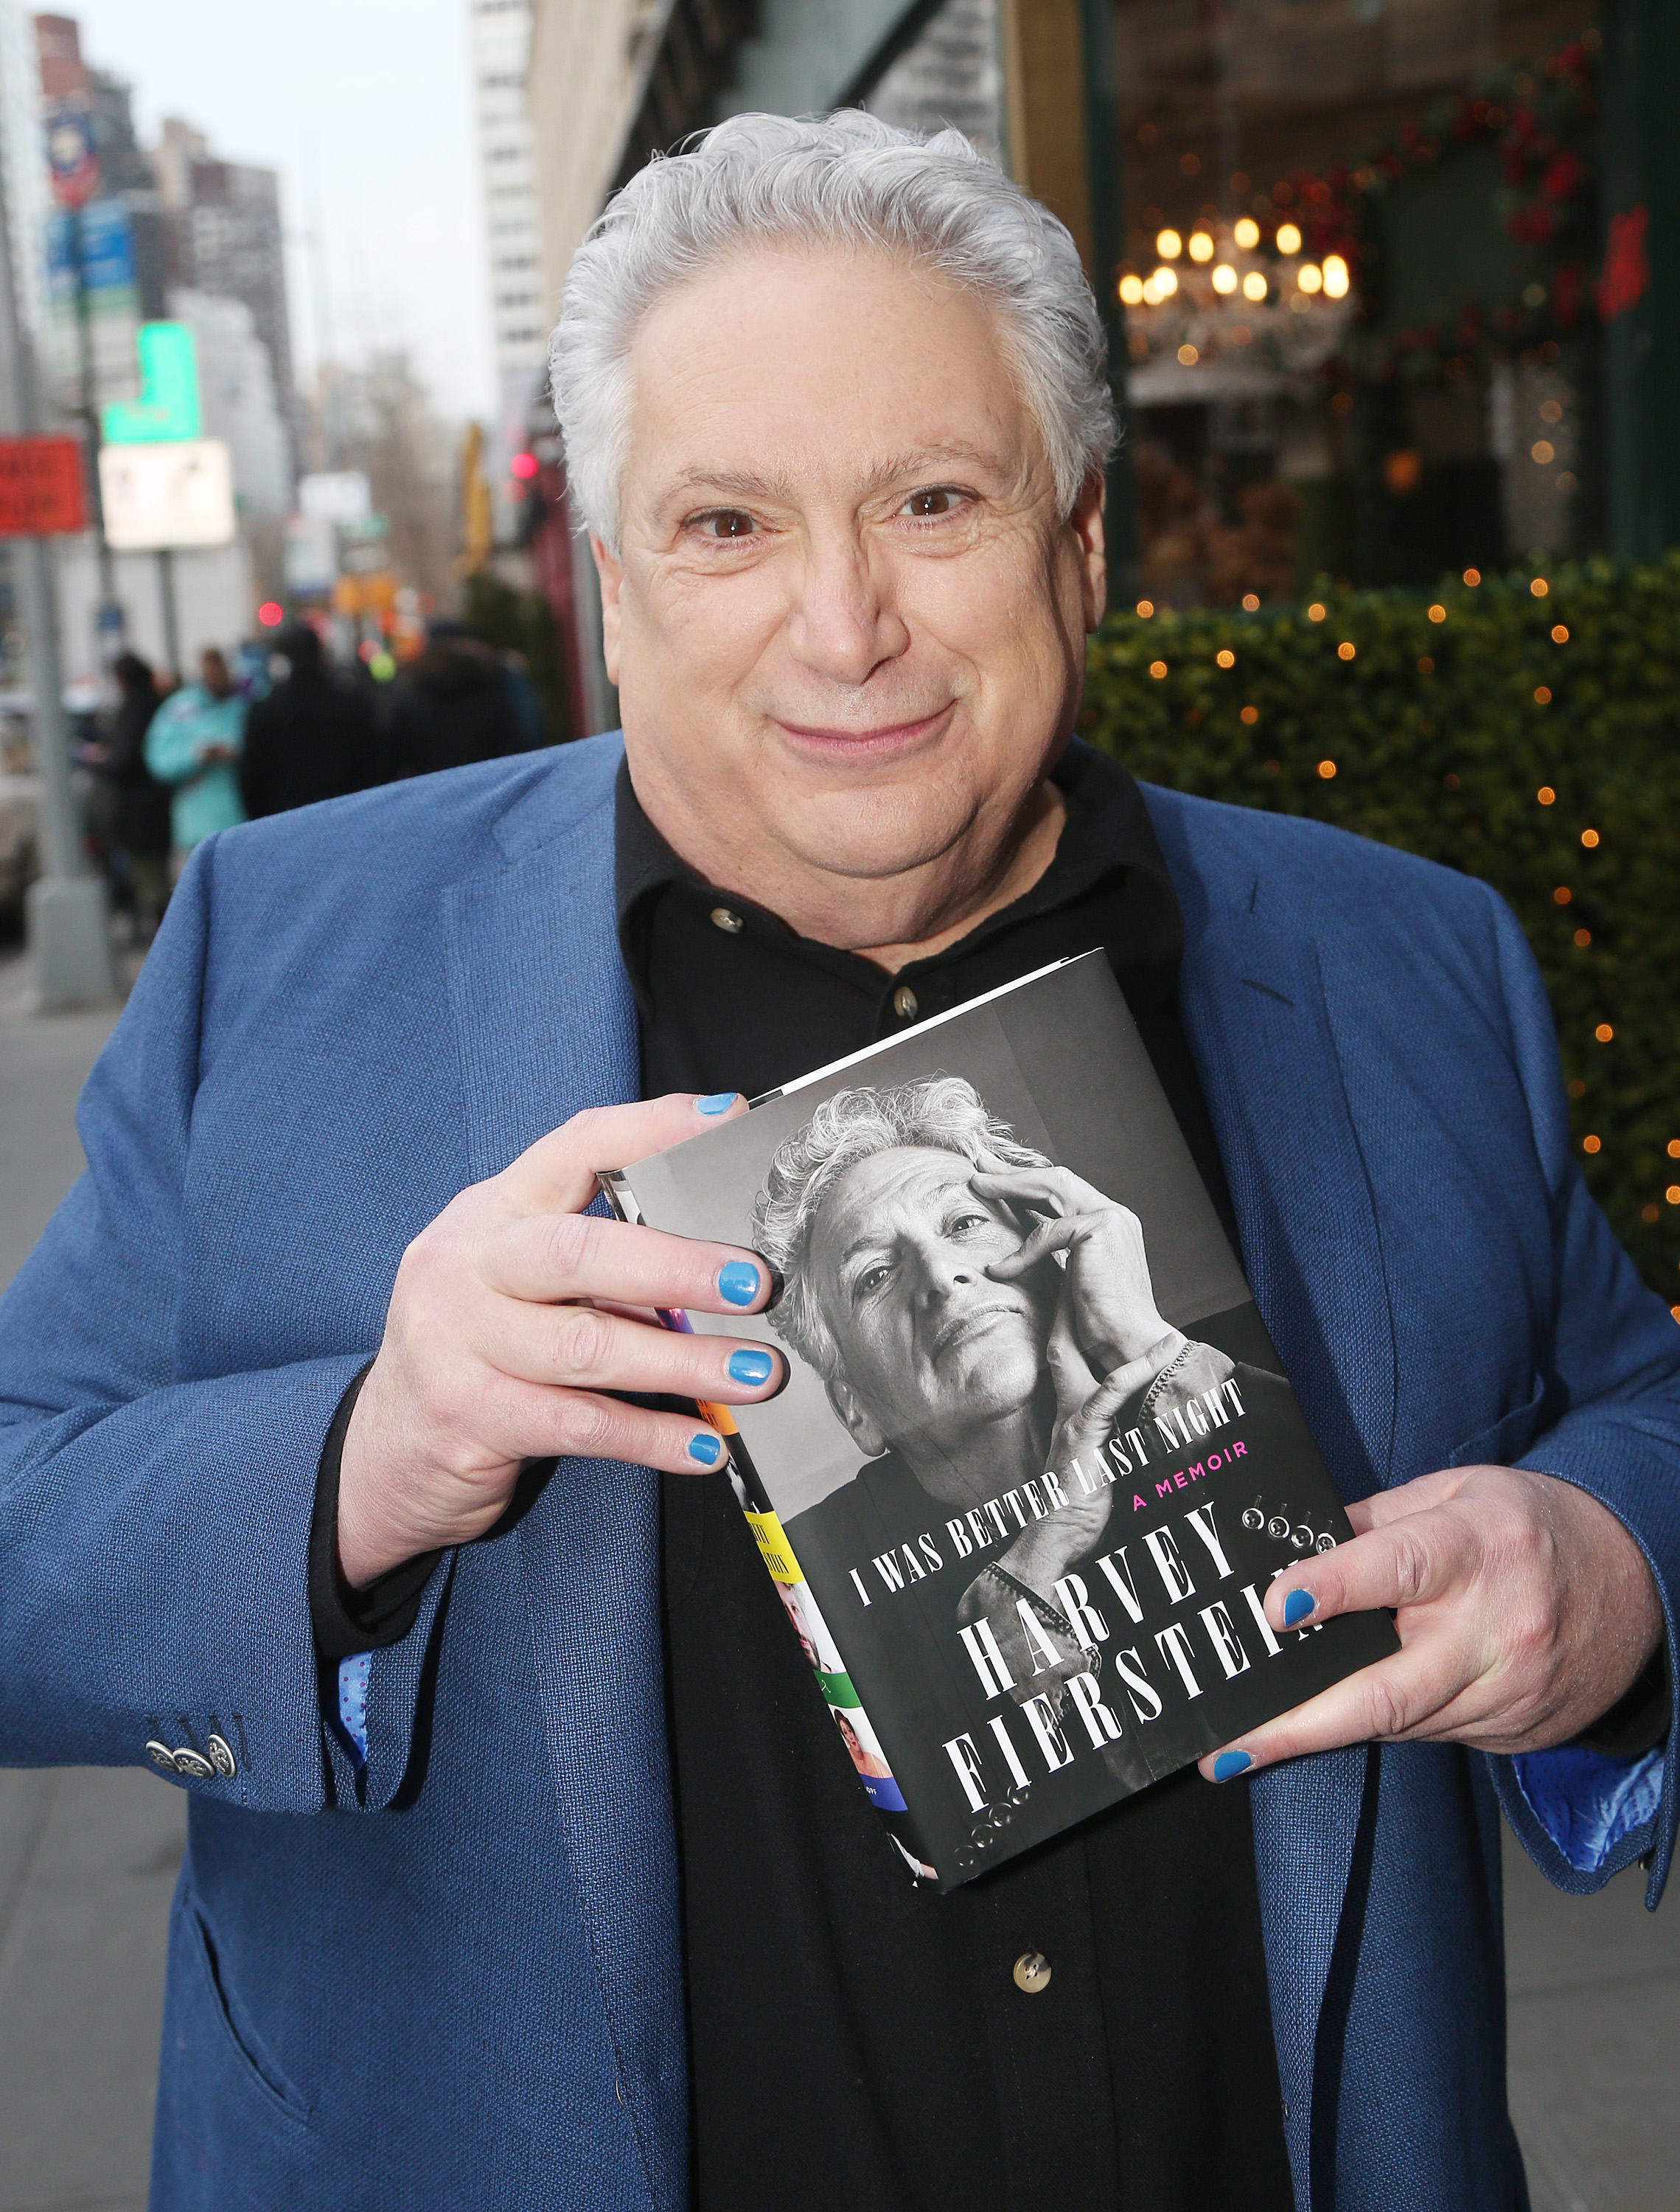 Harvey Fierstein poses at a dinner celebration for the release memoir "I Was Better Last Night" on March 1, 2022 in New York City. (Bruce Glikas—Getty Images)